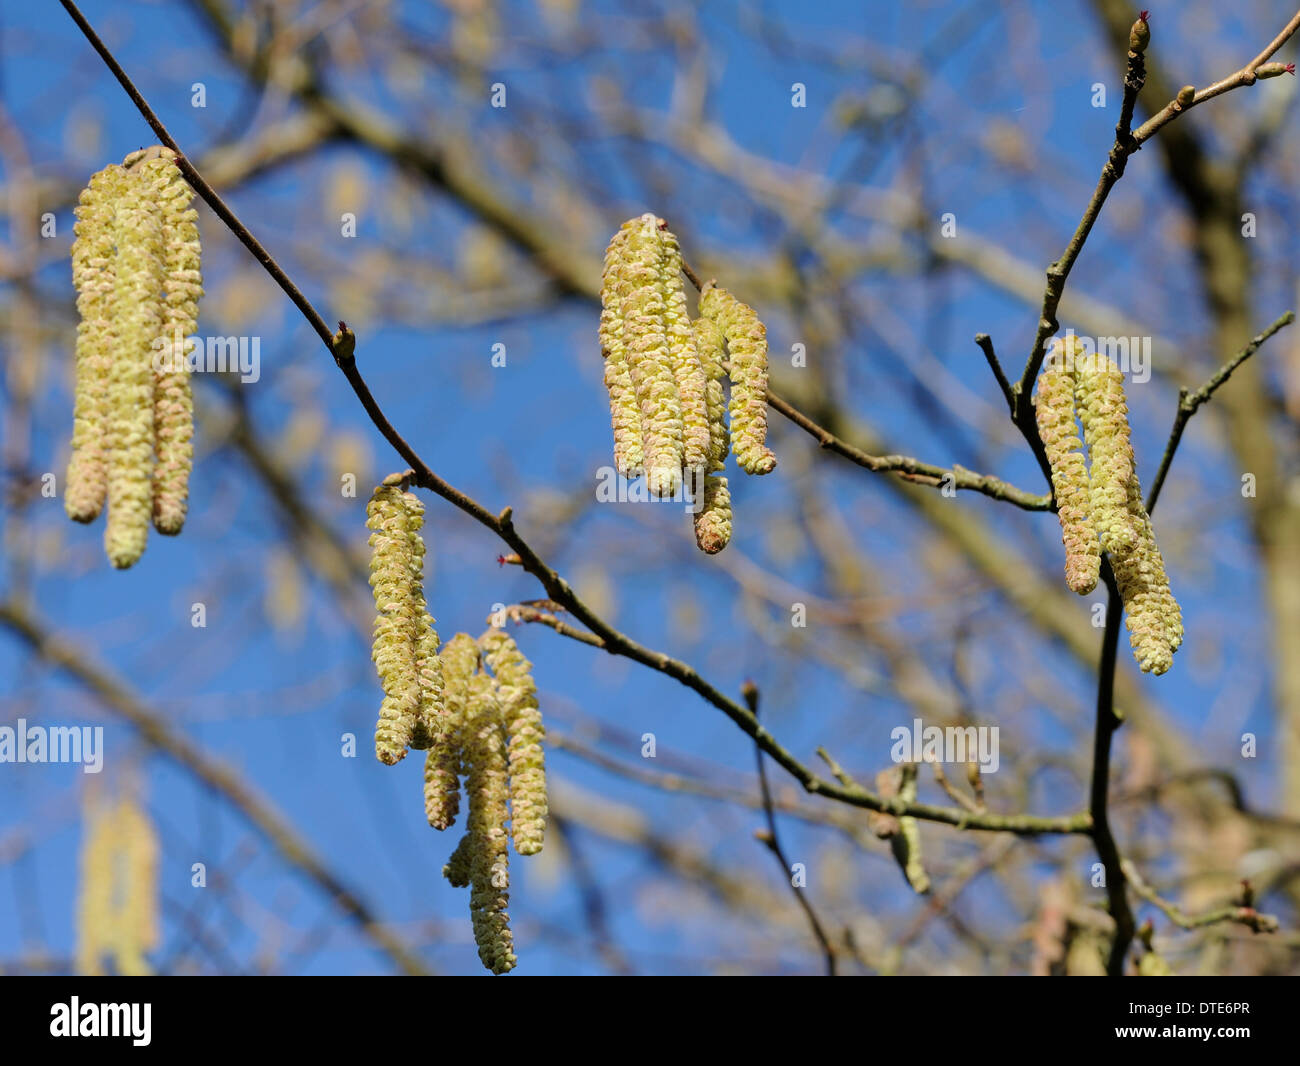 Catkins or lambs' tails, the male flowers of the common hedgerow tree Hazel (Corylus avellana), show that spring is not far away Stock Photo